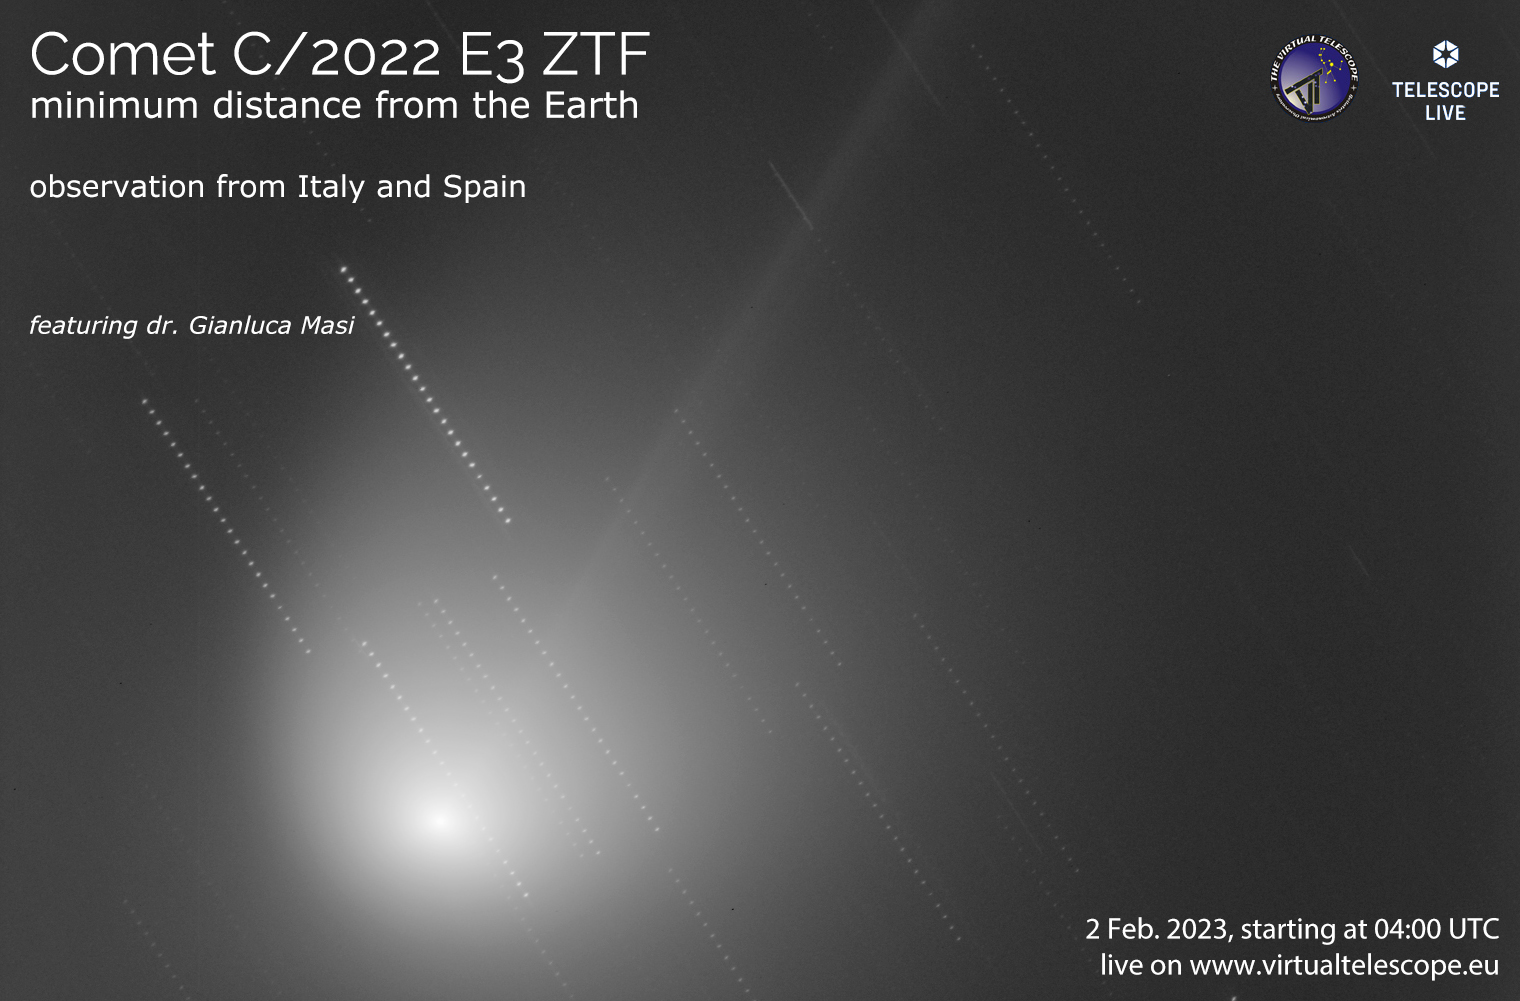 Comet C/2022 E3 ZTF flyby with the Earth: poster of the 2 Feb. 2023 event.